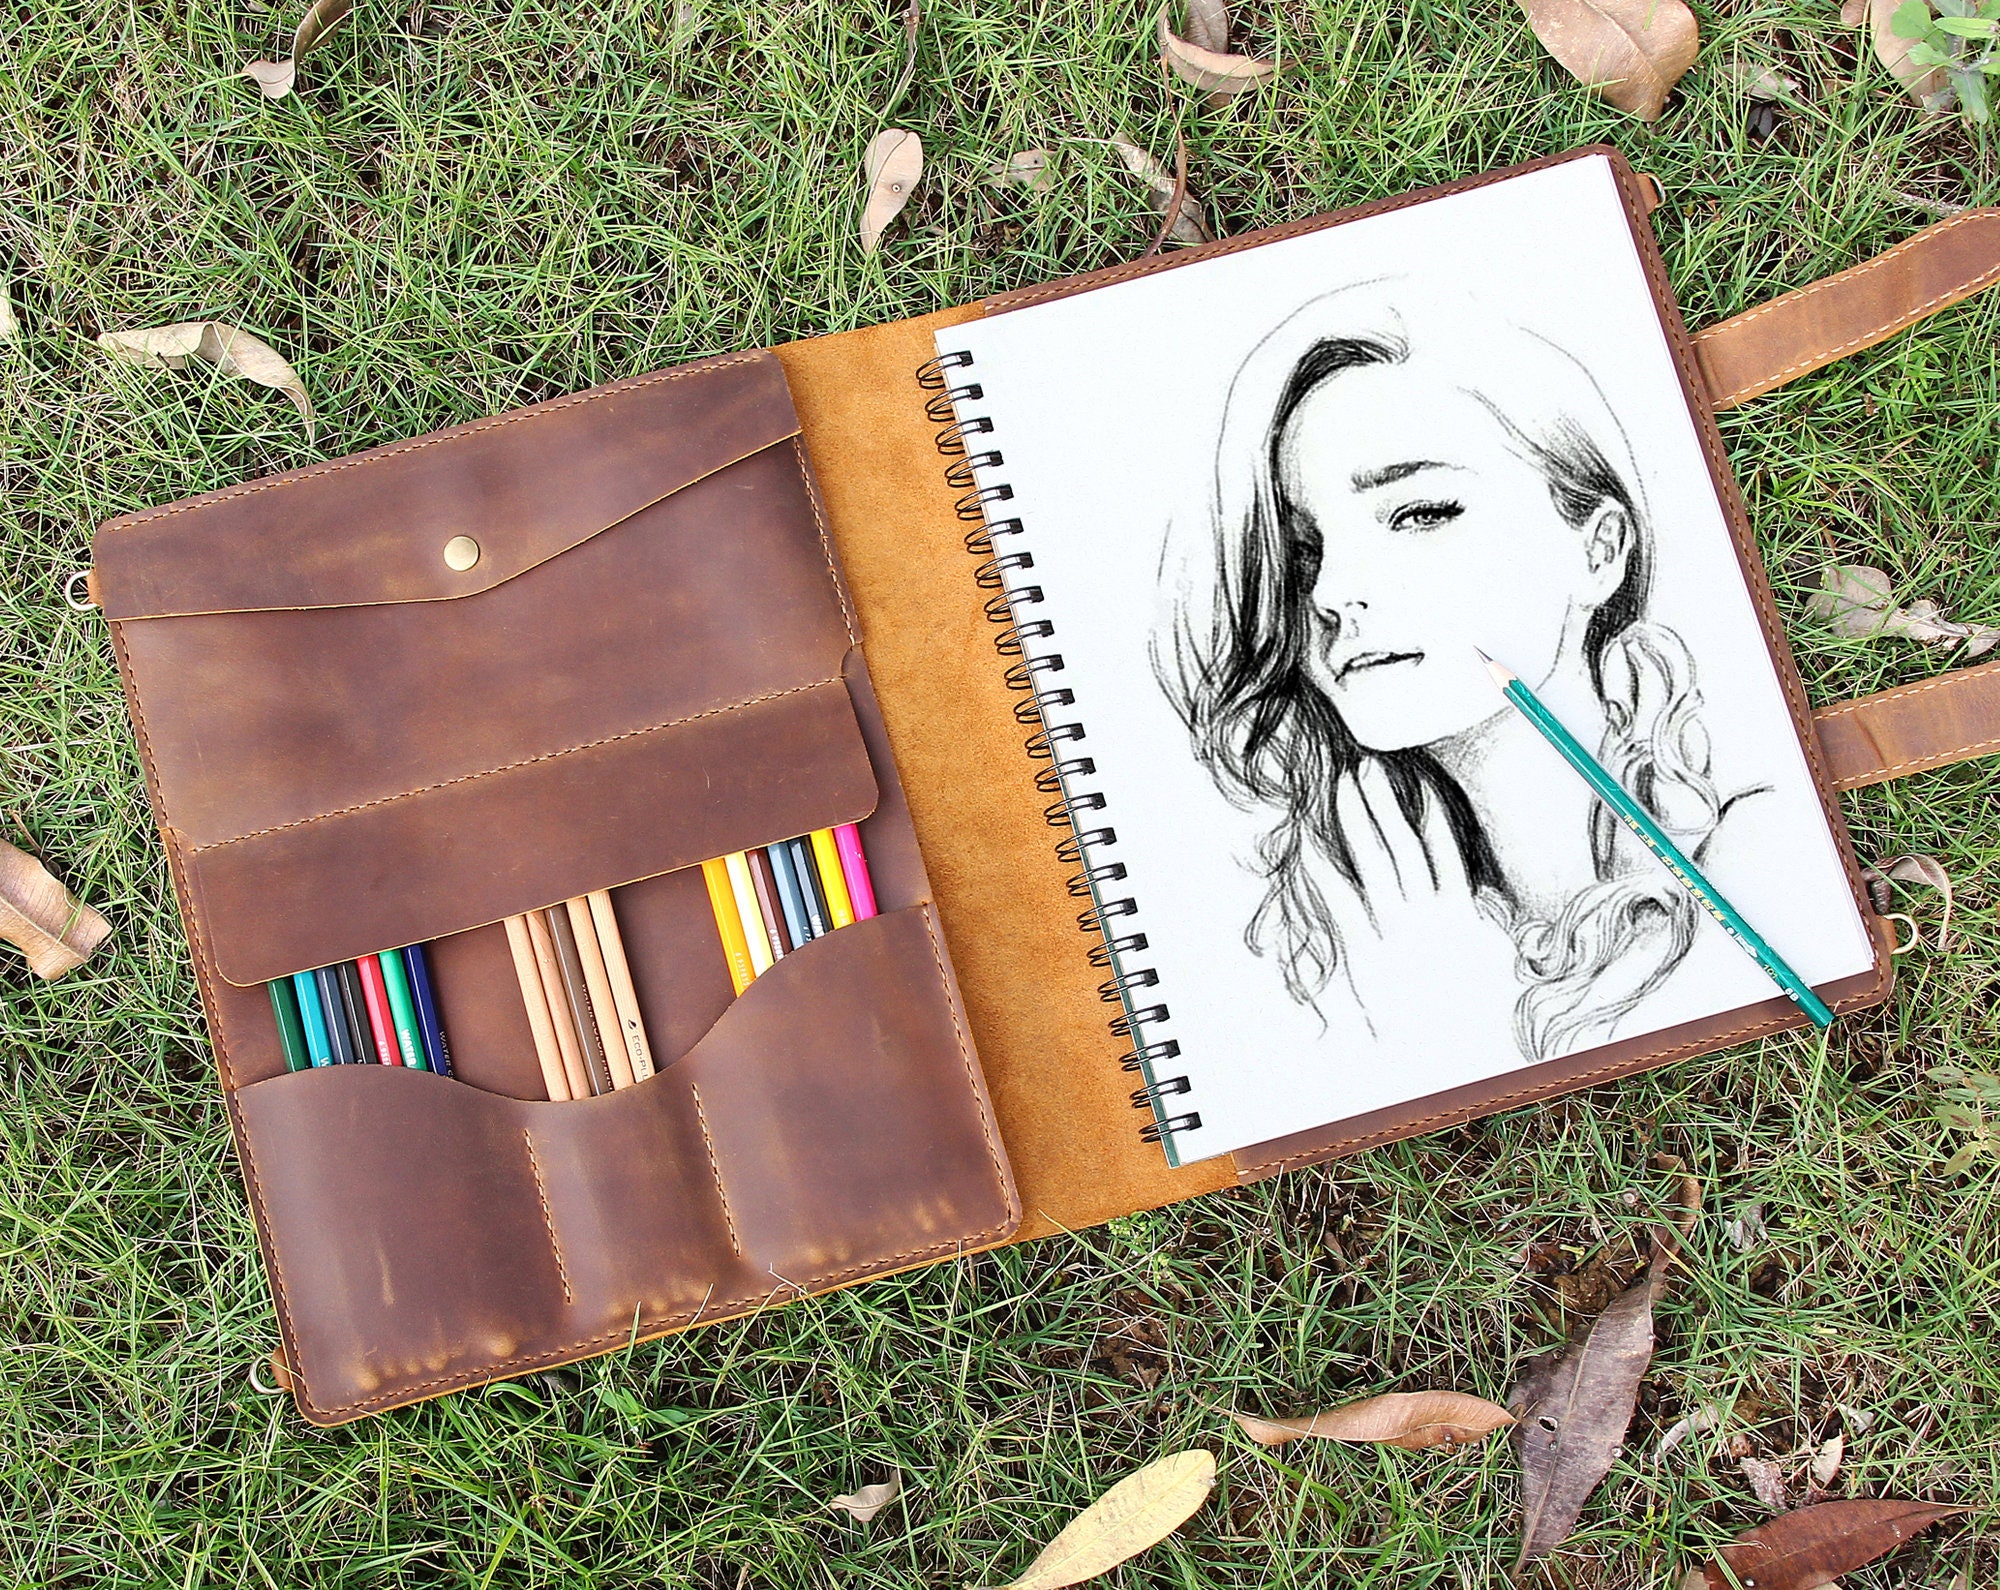 Personalized Leather Sketchbook Cover, Handmade Artist Sketch Pad Cover for  9x12 Top Bound Sketchbook, Leather Drawing Sketchbook Cover 